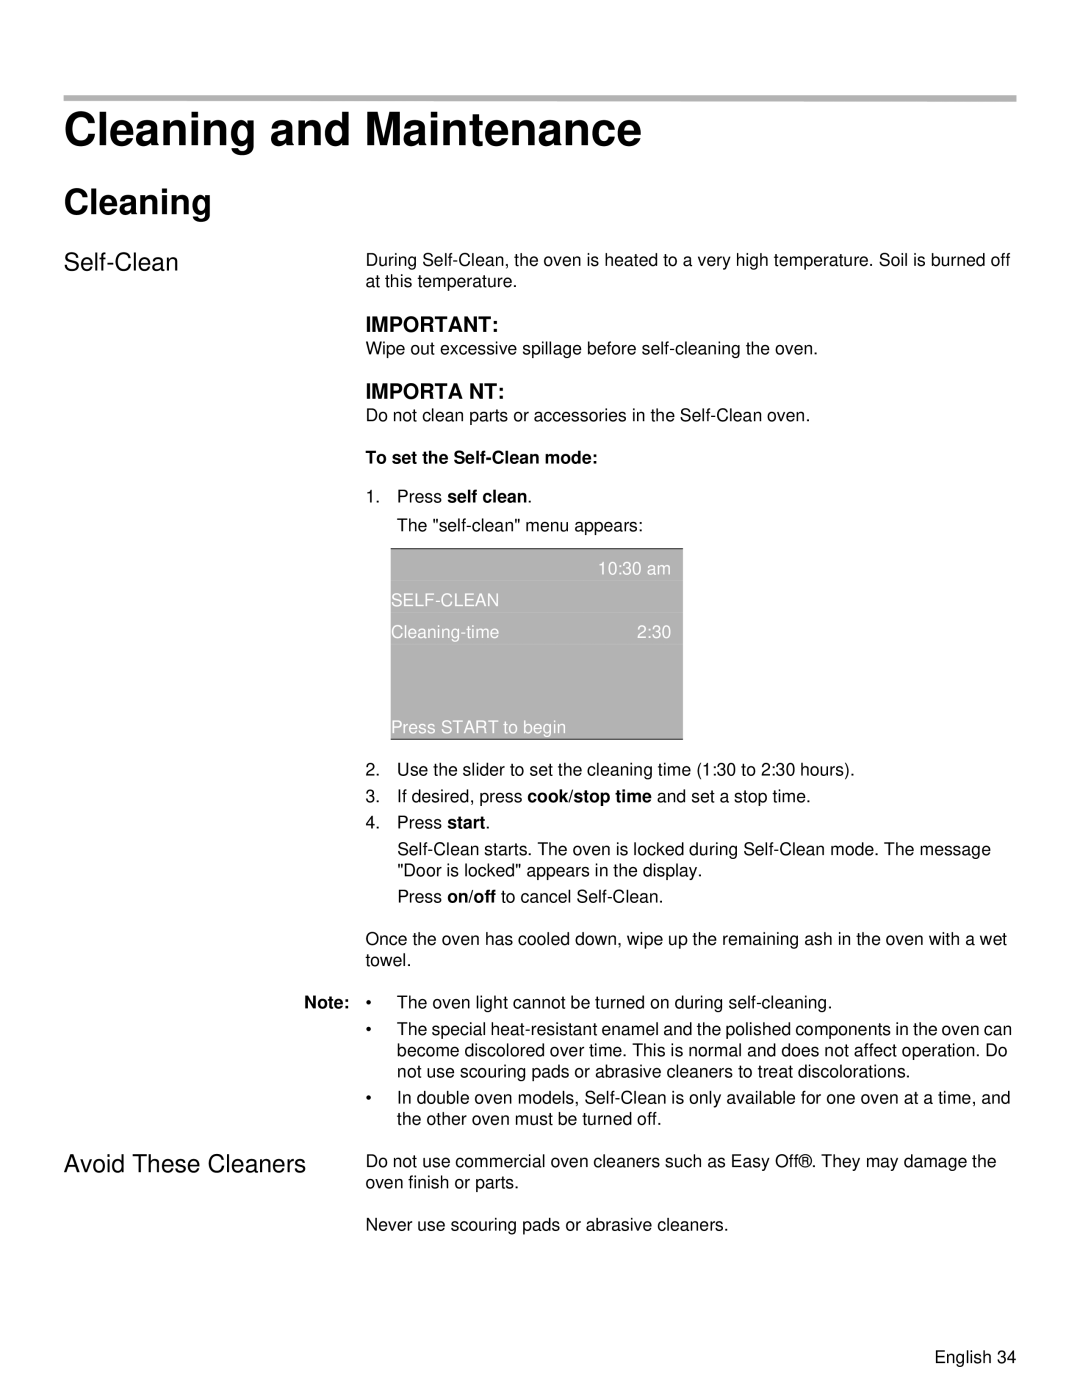 Siemens HB30S51UC, HB30D51UC manual Cleaning and Maintenance, Self-Clean, Avoid These Cleaners, Importa Nt 